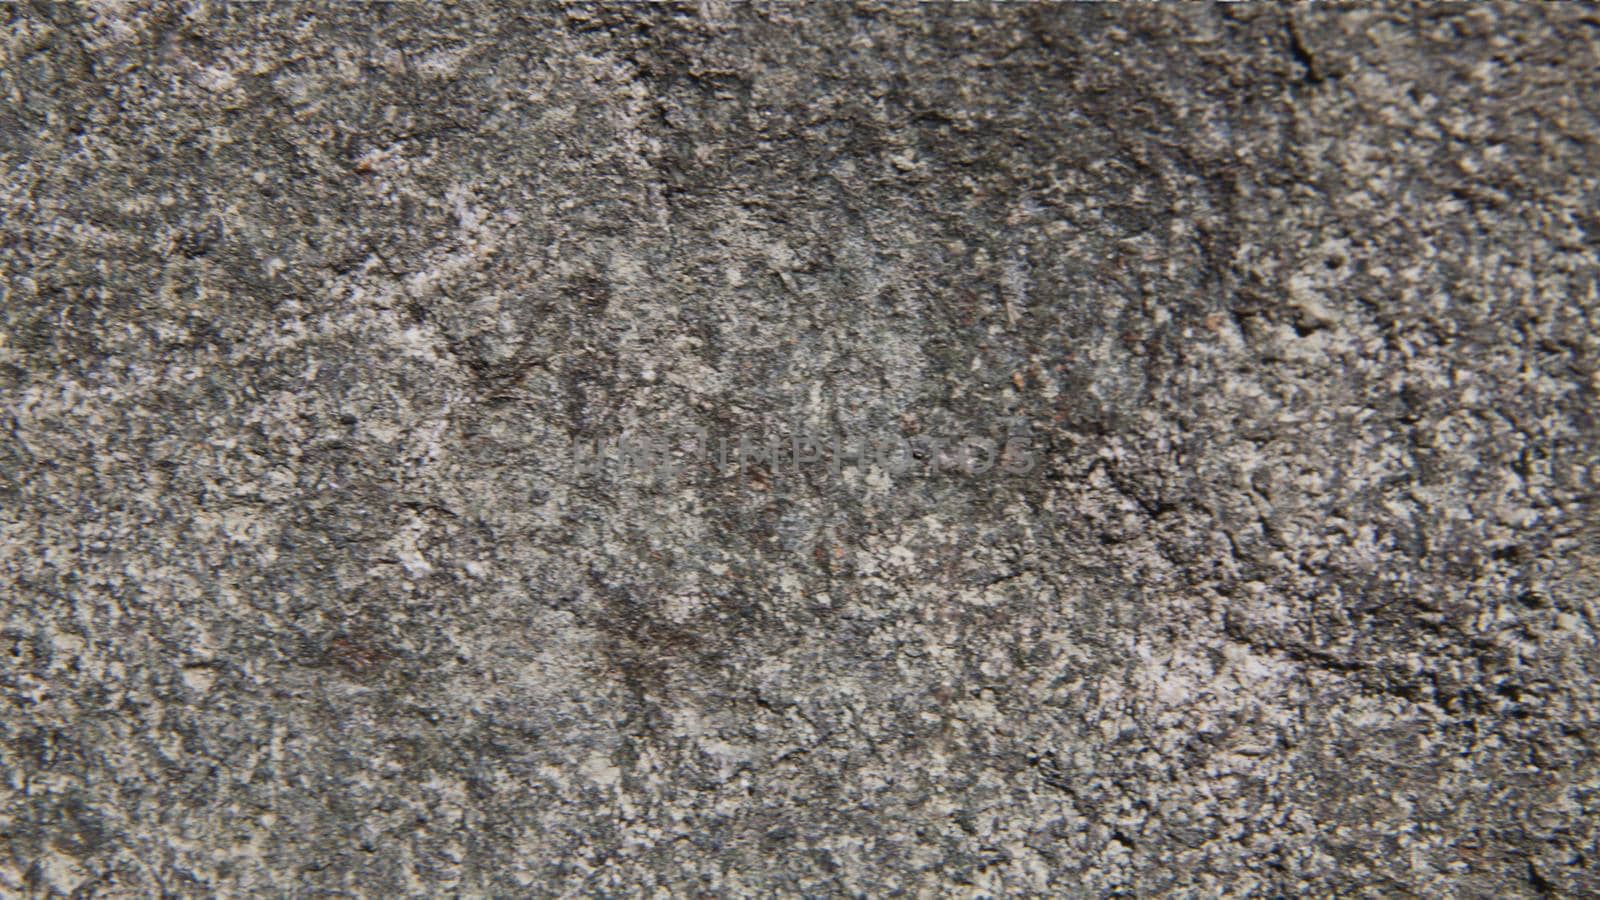 Natural Silver Galaxy stone texture background. stone surface for interior and exterior manufacturers use.